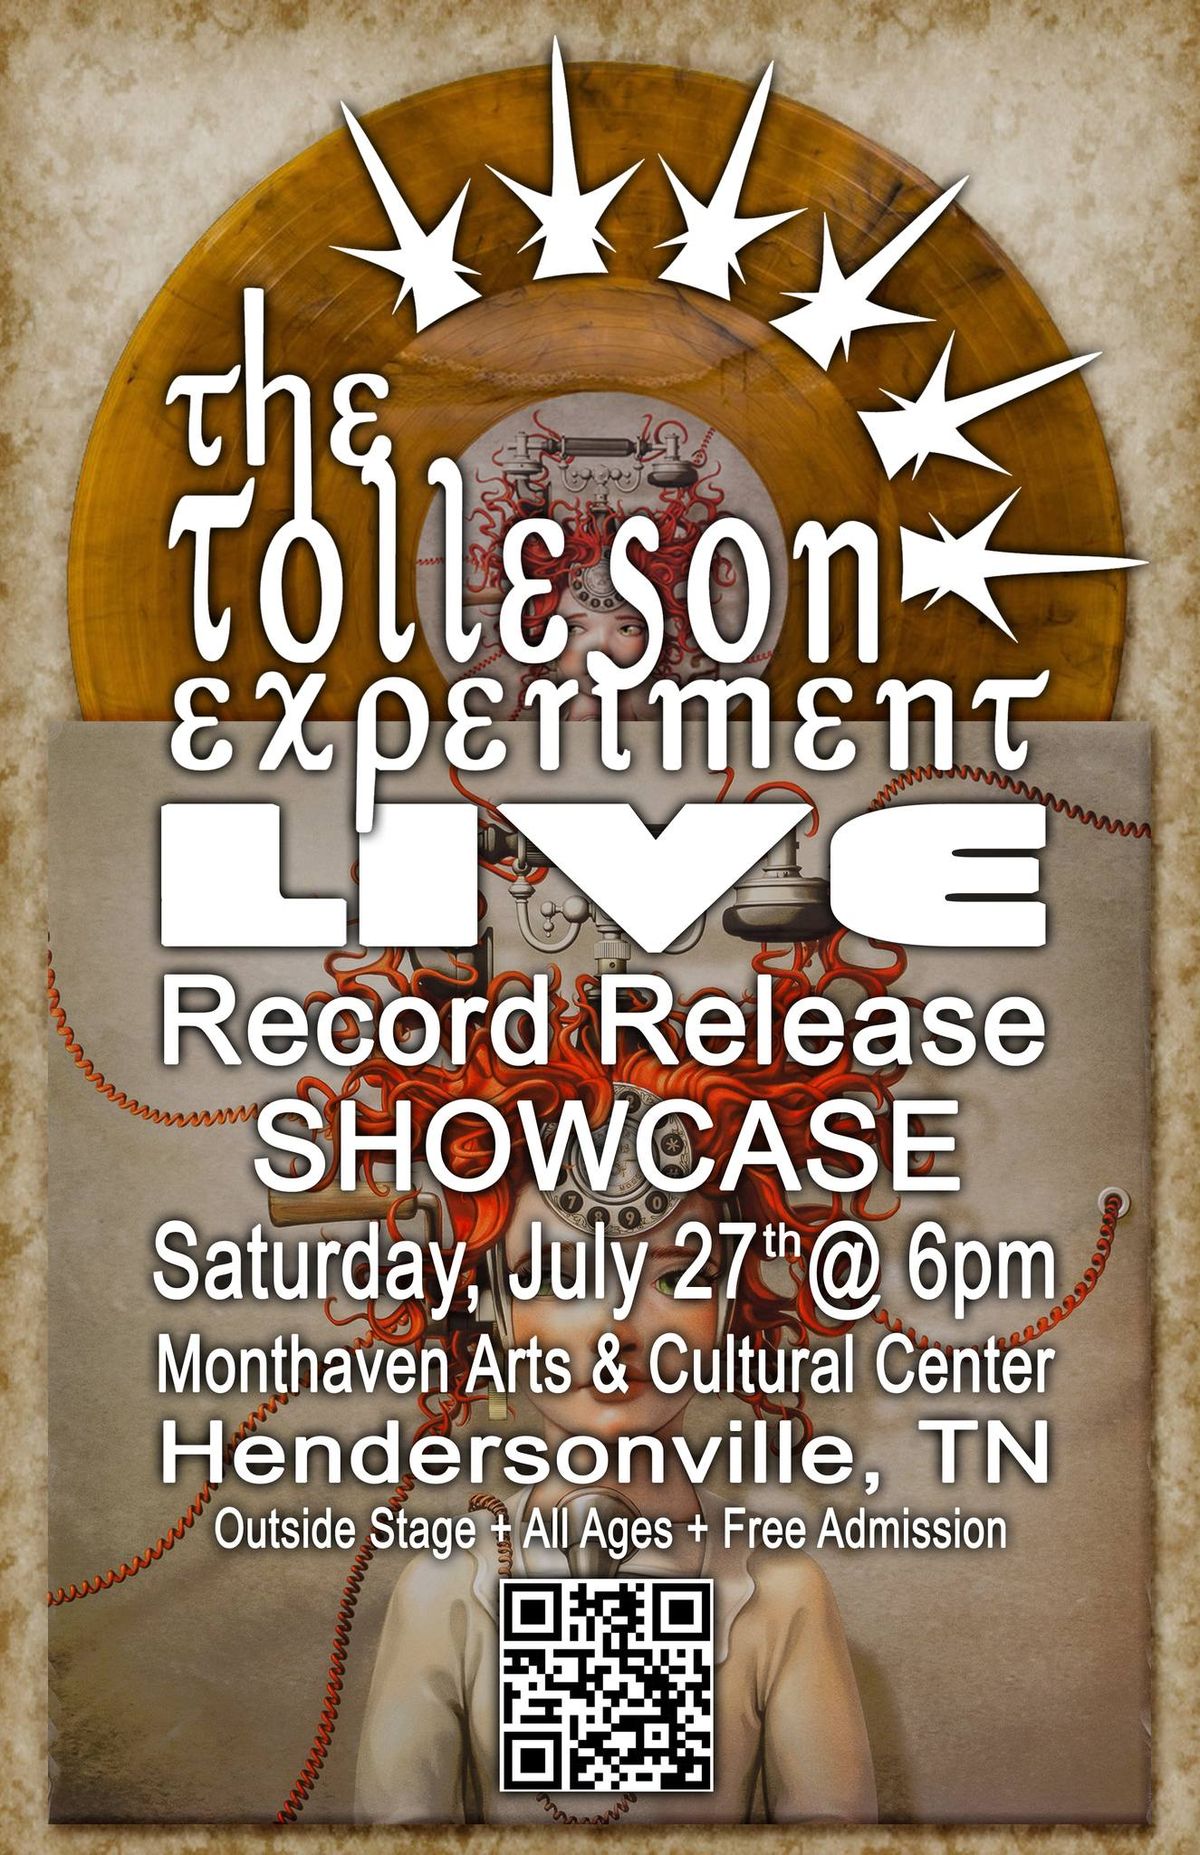 Record Release Showcase @ Monthaven